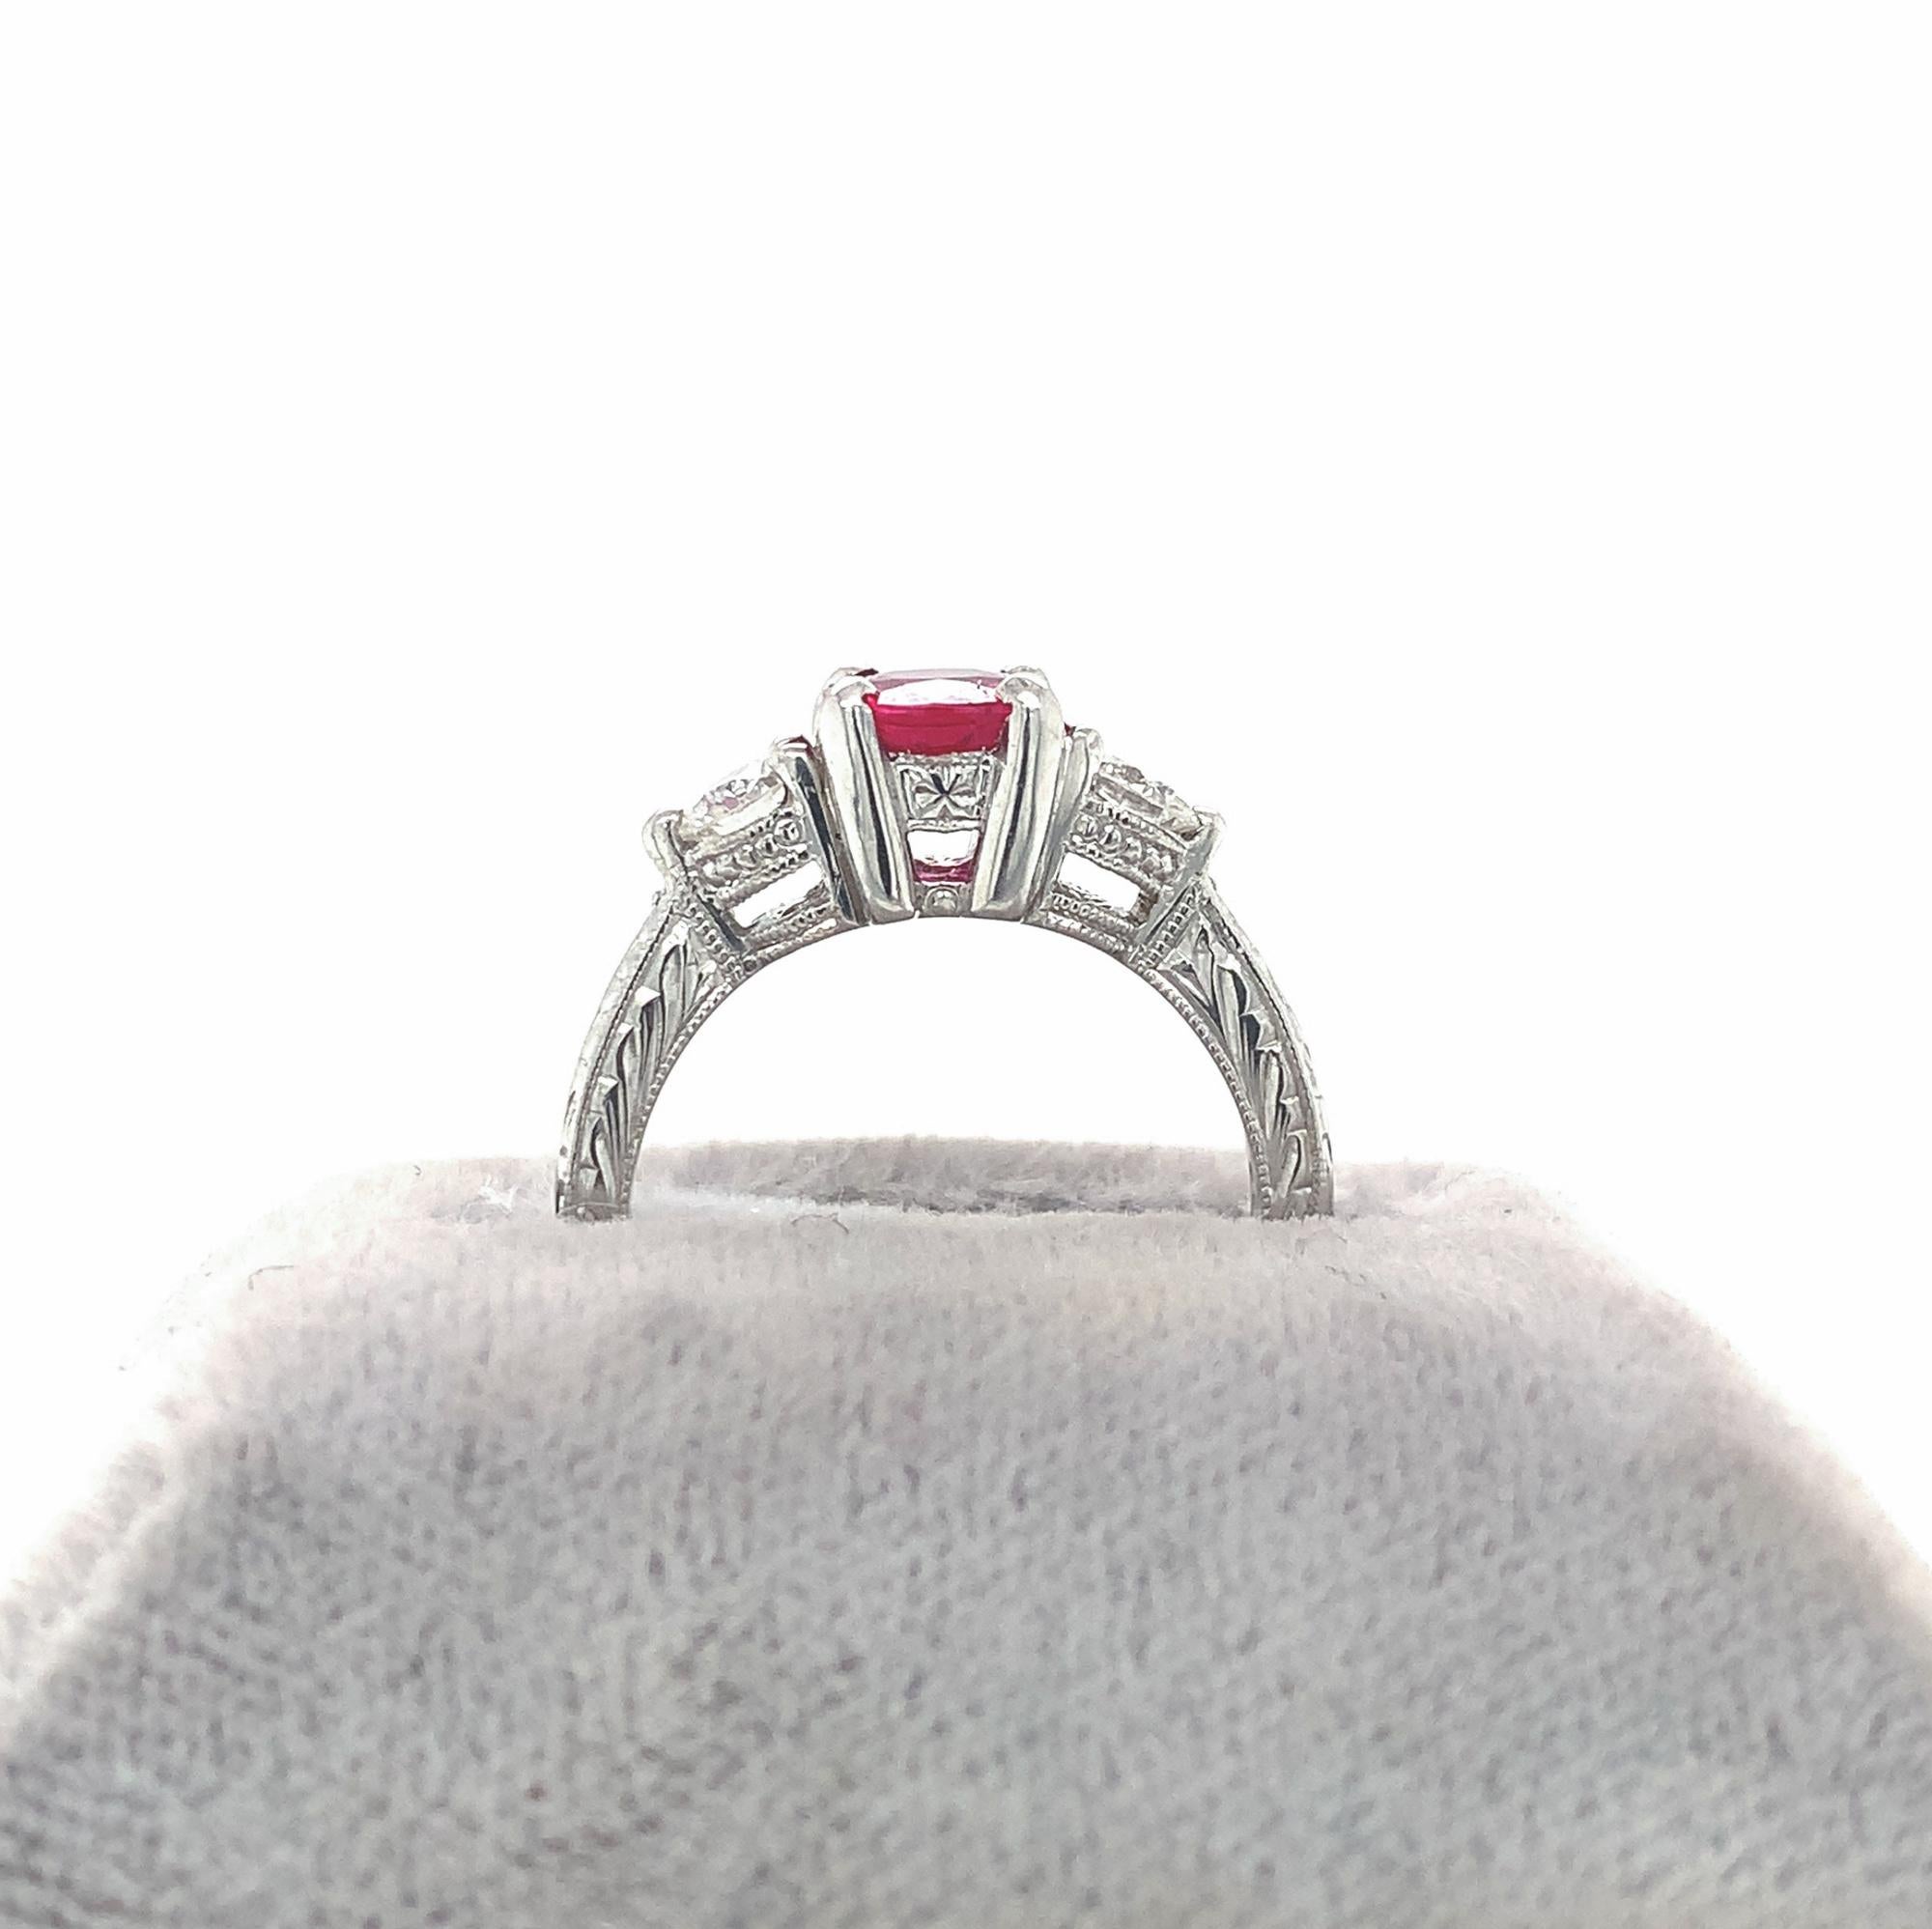 Top color GIA natural Burmese red ruby weighing 1.10 carats set in platinum. GIA report included. The ruby measures 6.69mm x 5.73mm is accented by 2 round brilliant cut diamonds weighing .45ct total. The platinum setting is hand engraved on 3 sides.